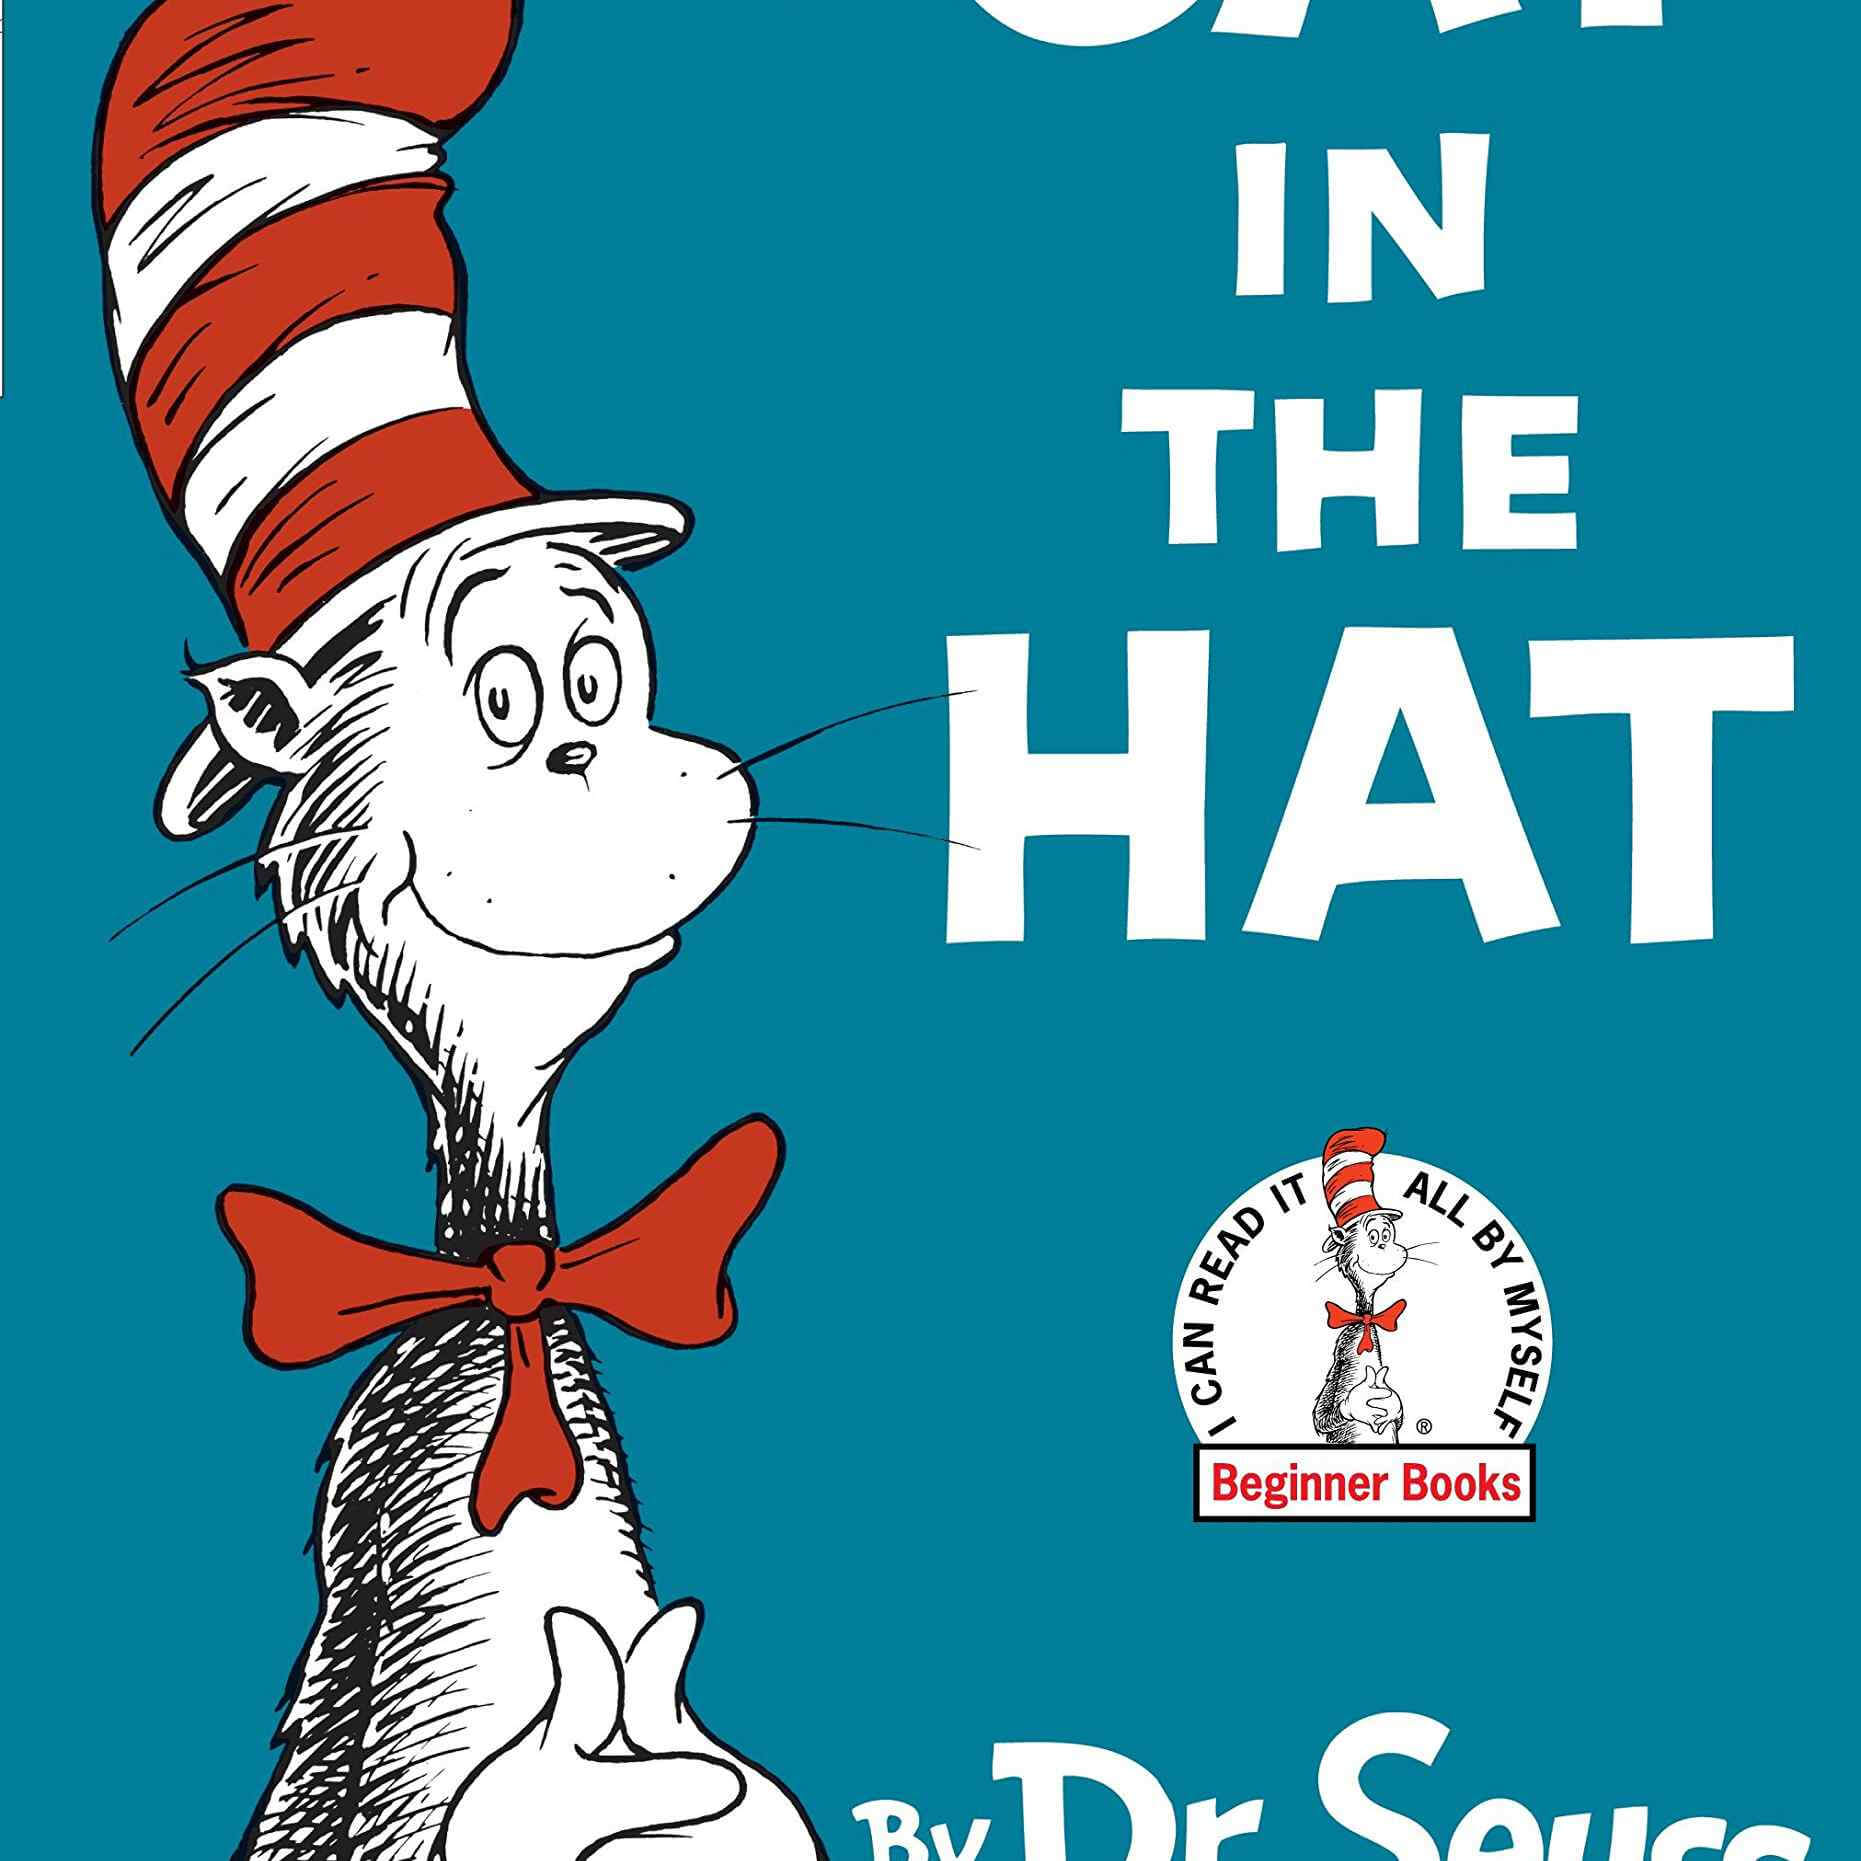 Printable Dr. Seuss Worksheets And Coloring Sheets with Blank Cat In